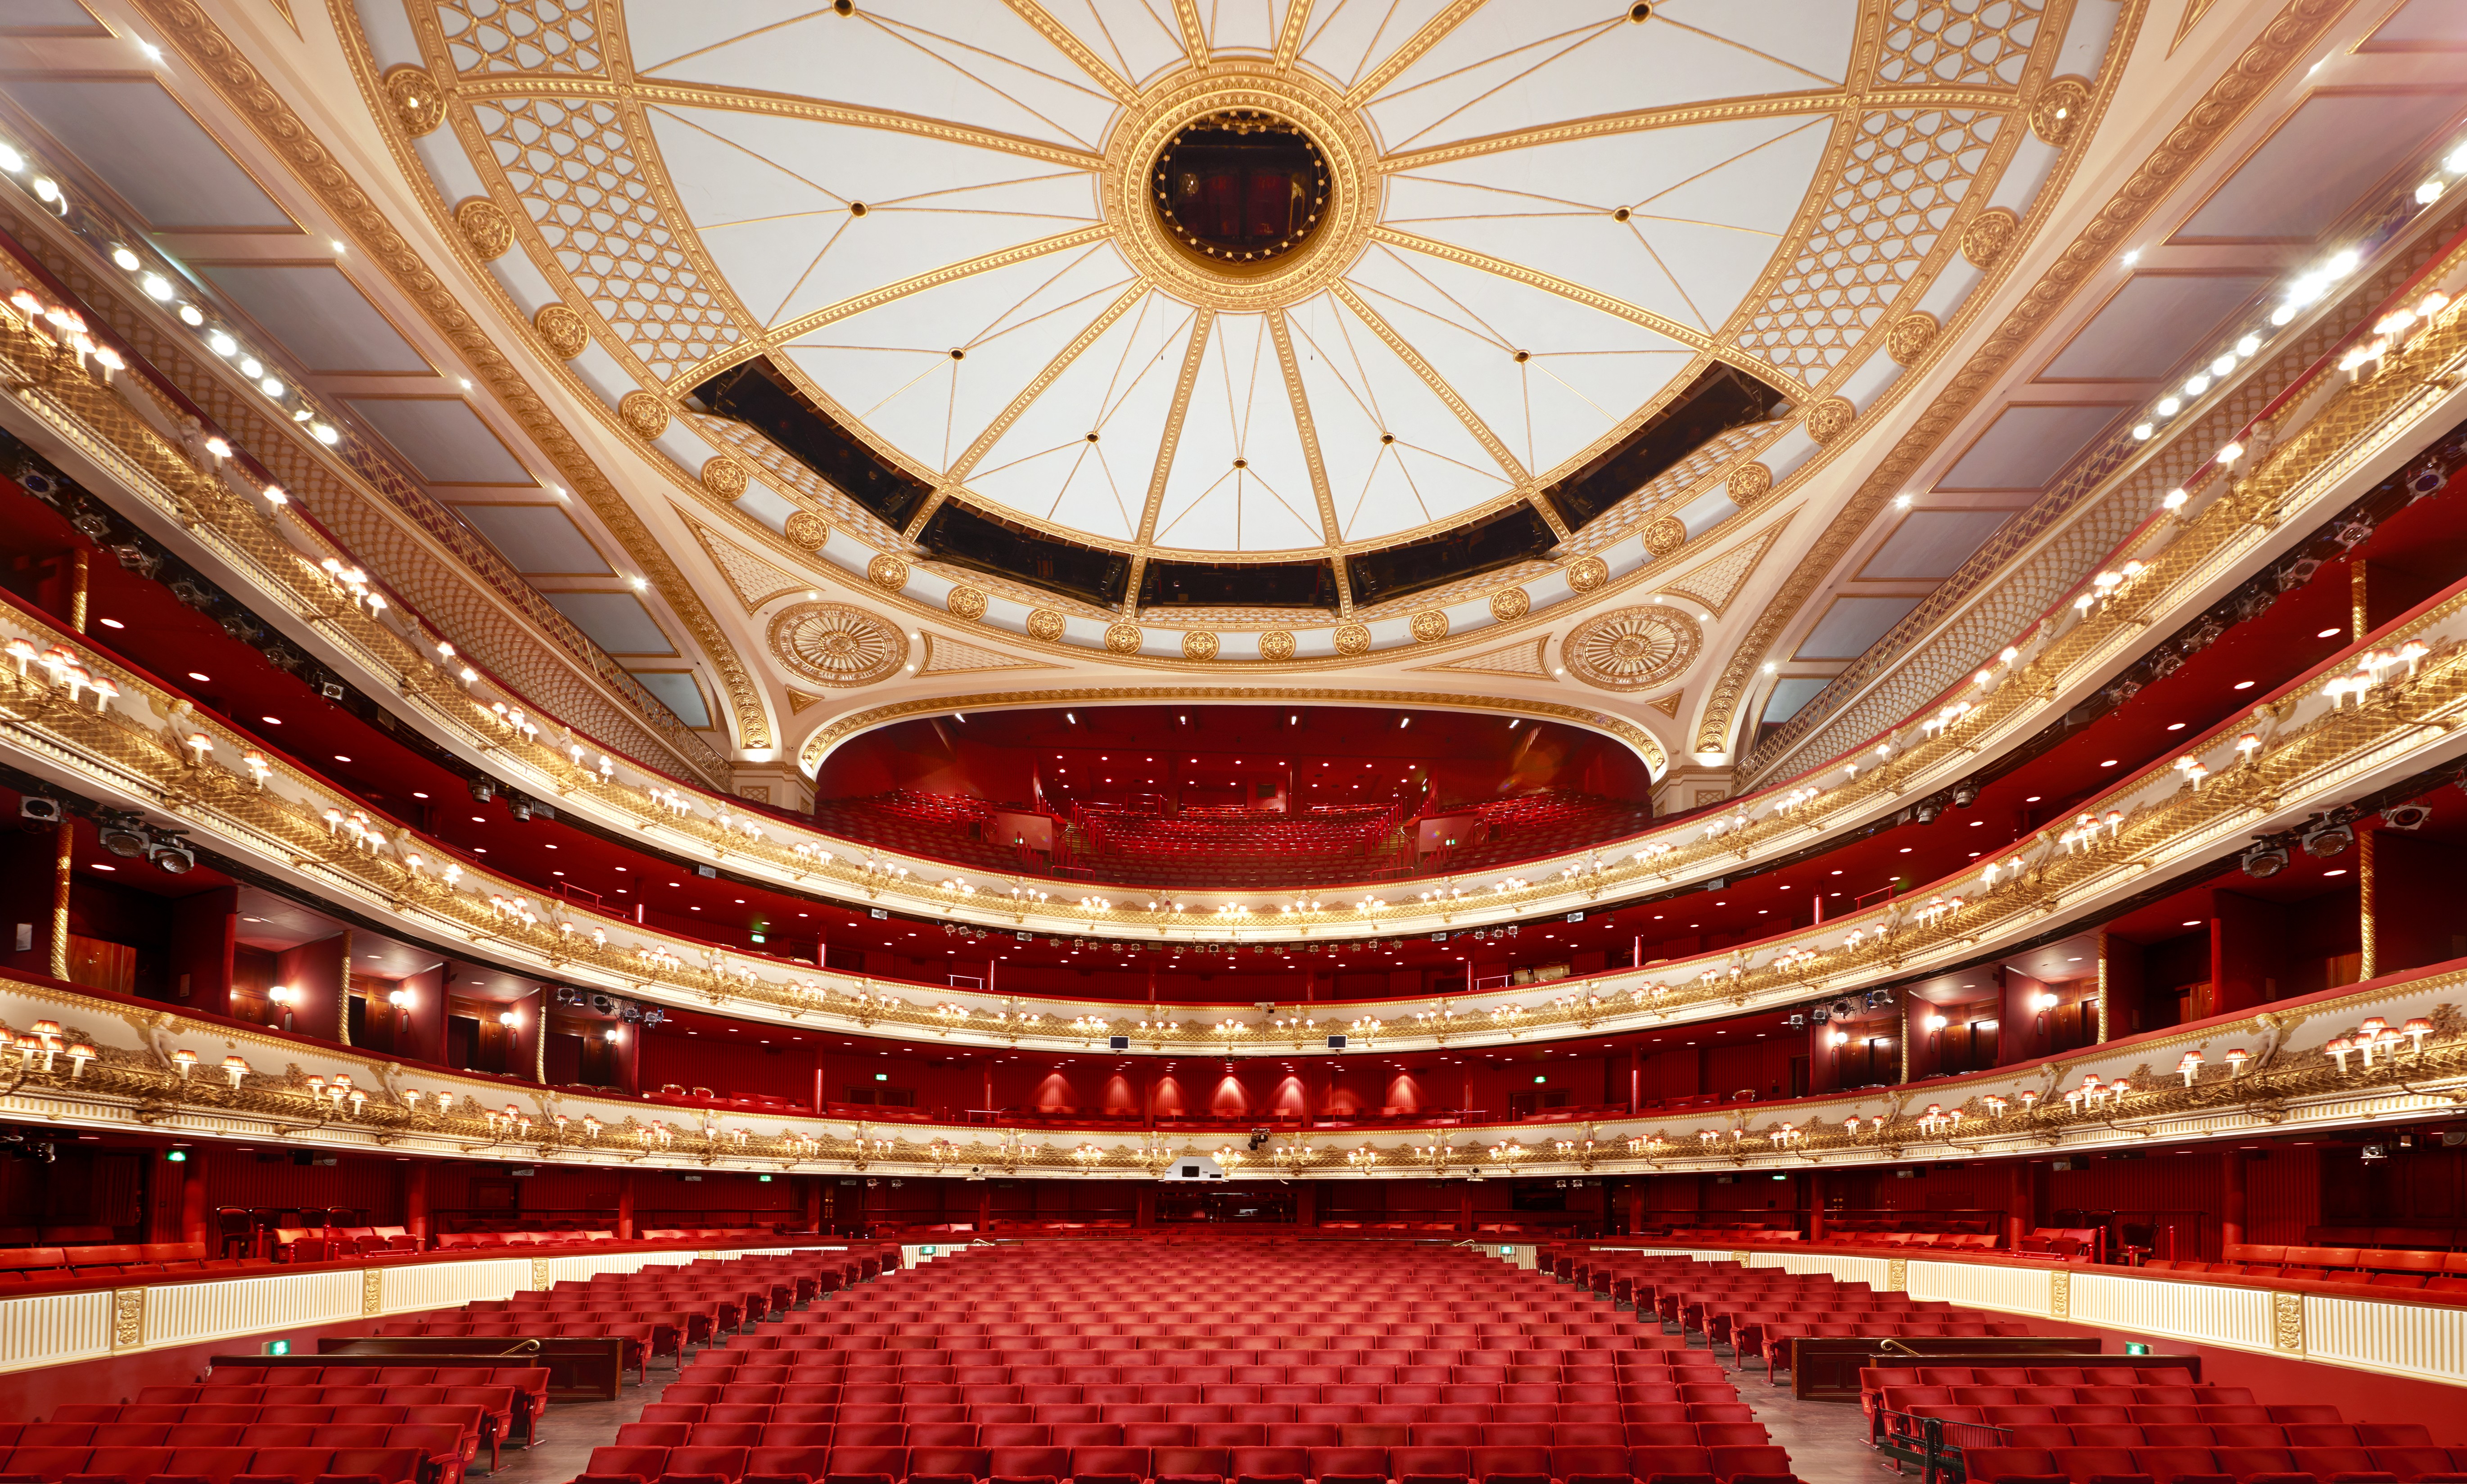 LONDON,ENGLAND - JANUARY 21: A view from the stage of the Auditorium of the Royal Opera House Covent Garden on January 21,2020 in London,England. (Photo Peter Dazeley/Getty Images) (Foto: Getty Images)